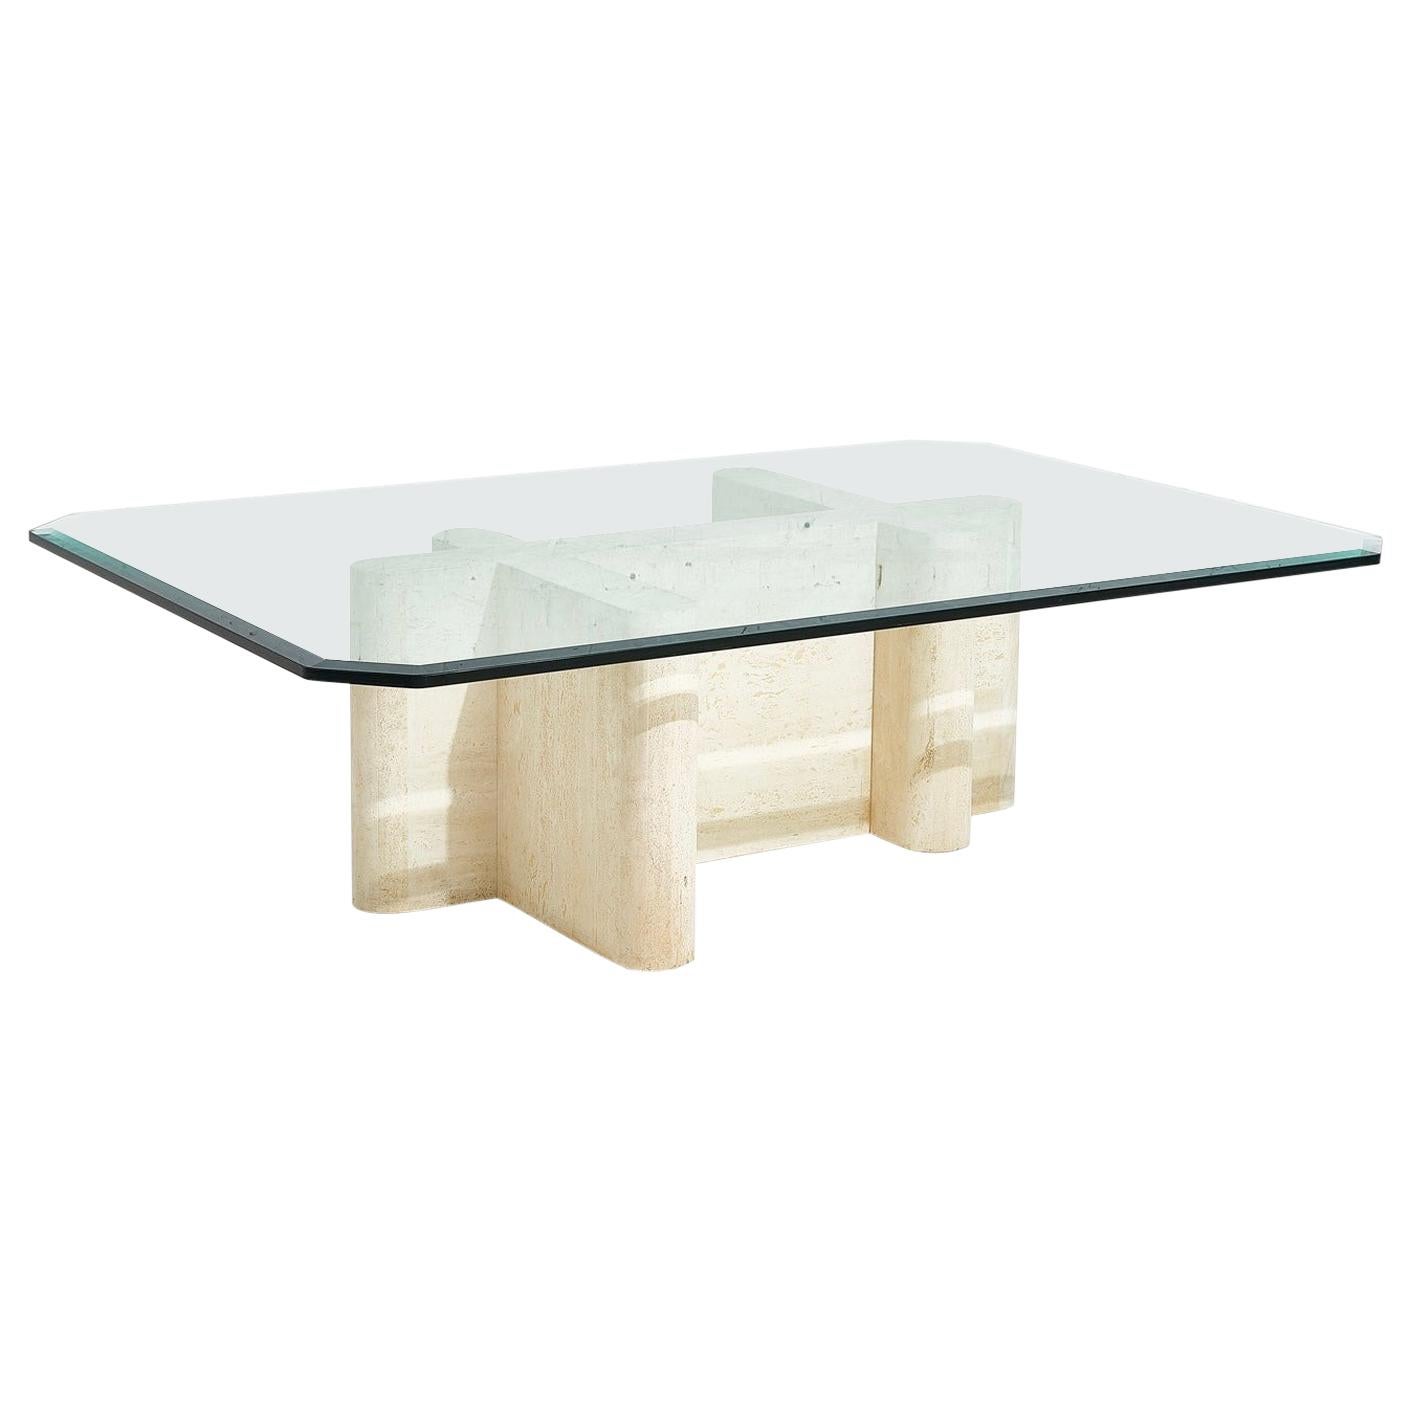 Sculptural travertine coffee table. Made in Italy circa 1970’s. Solid travertine marble base with glass top.
  